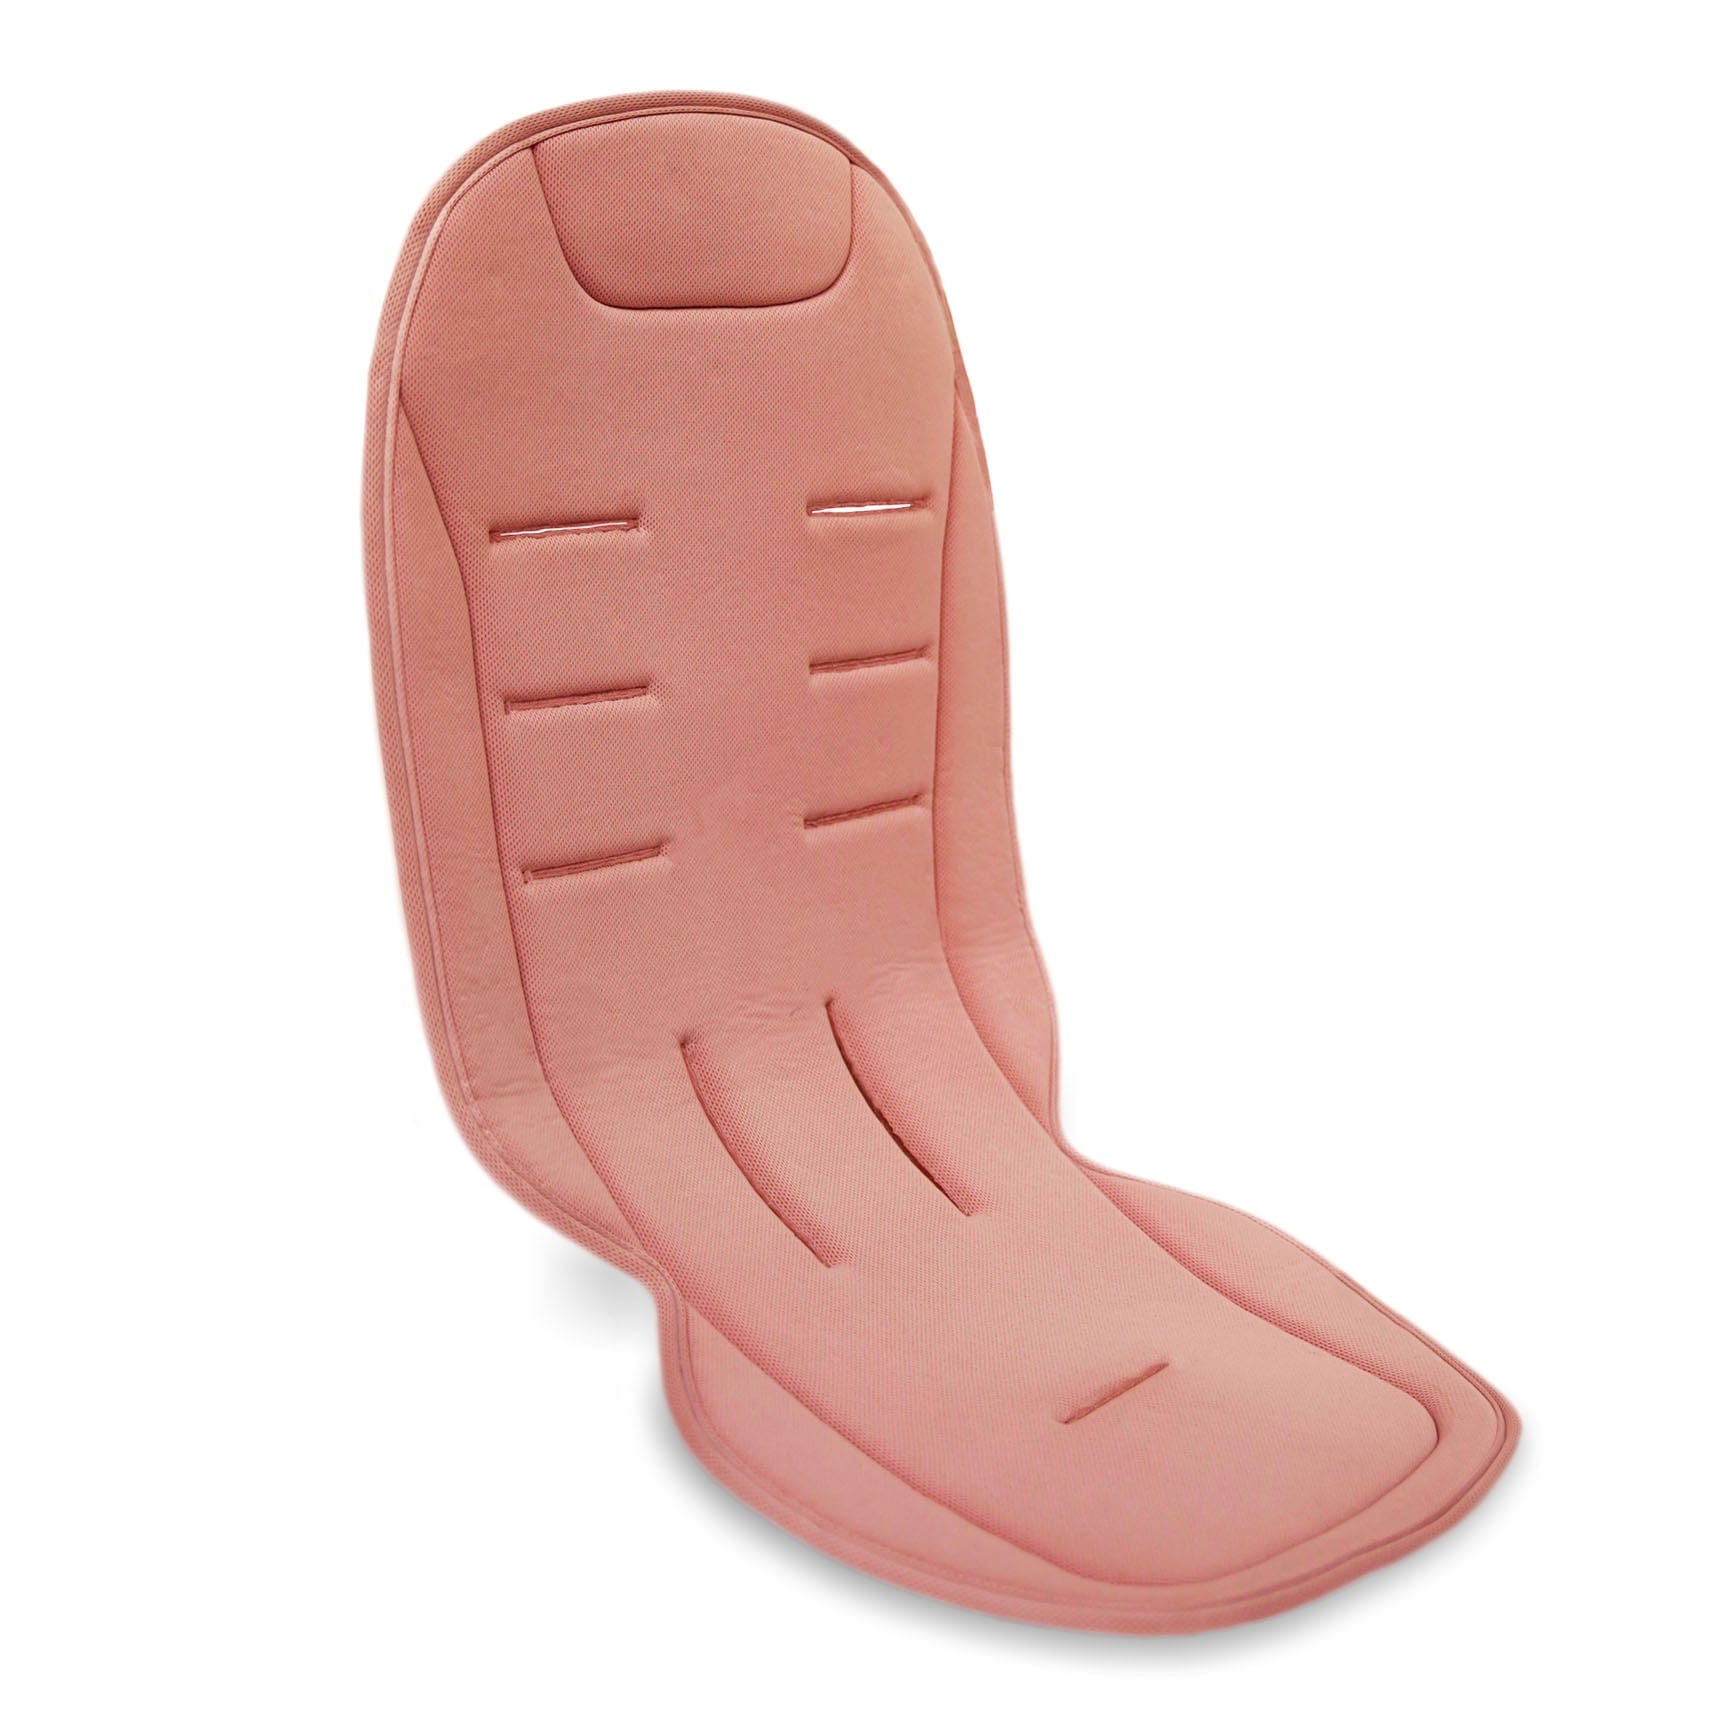 Joolz Seat Liner in Pink Buggy Accessories 560045